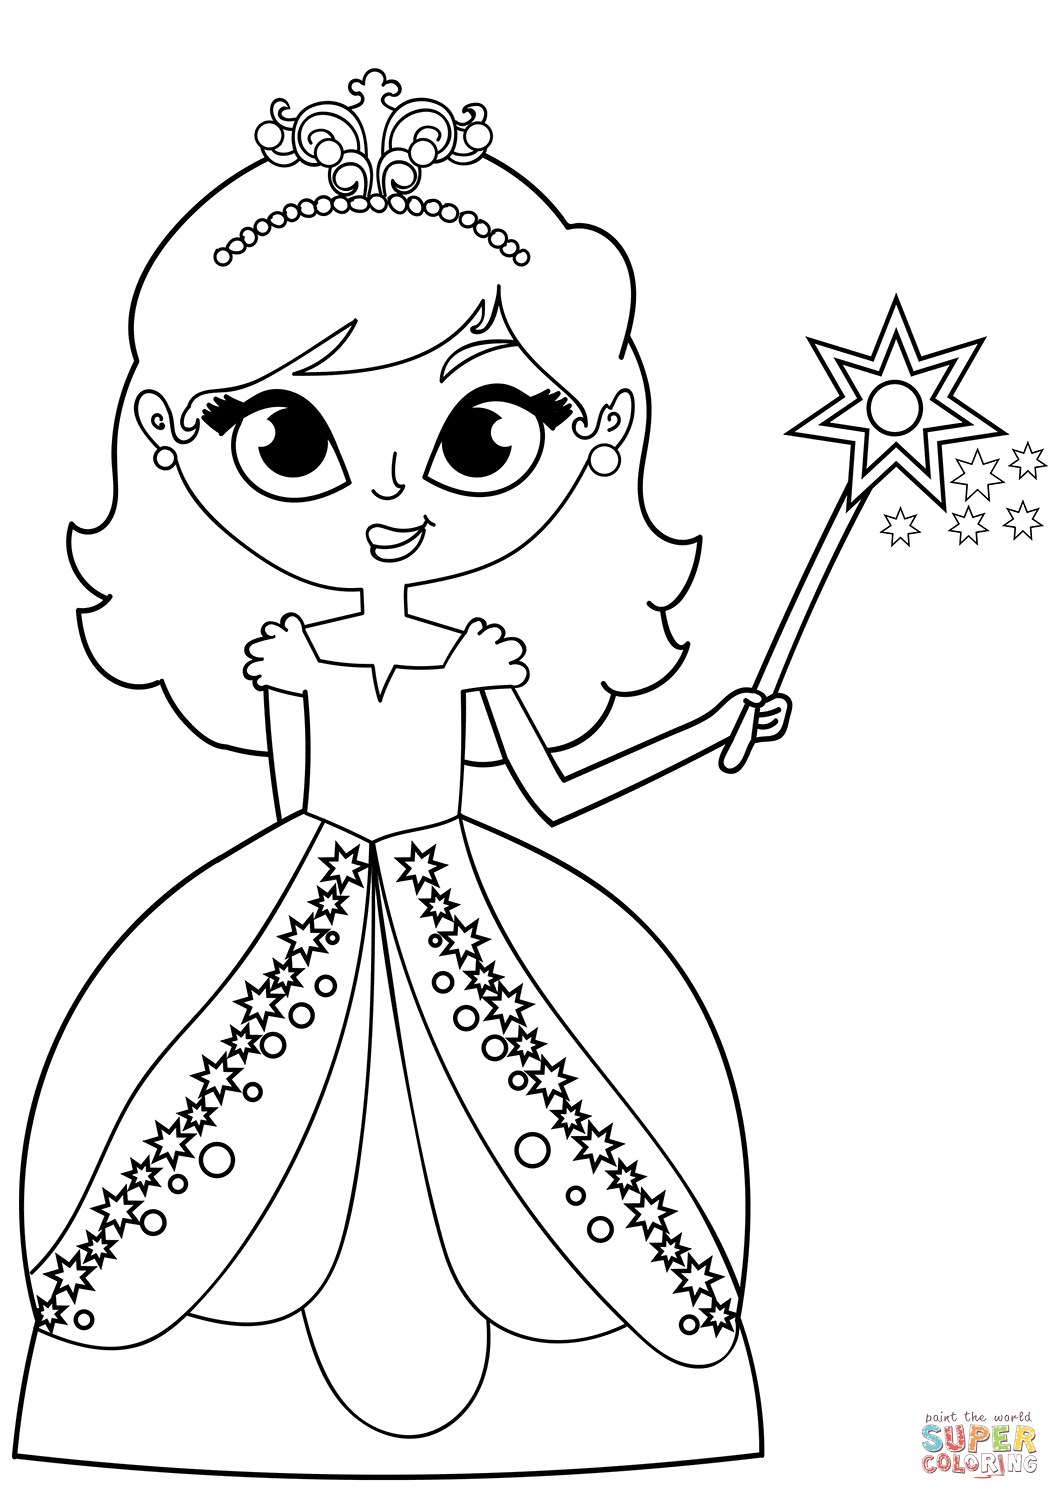 Princess with magic stick coloring page free printable coloring pages